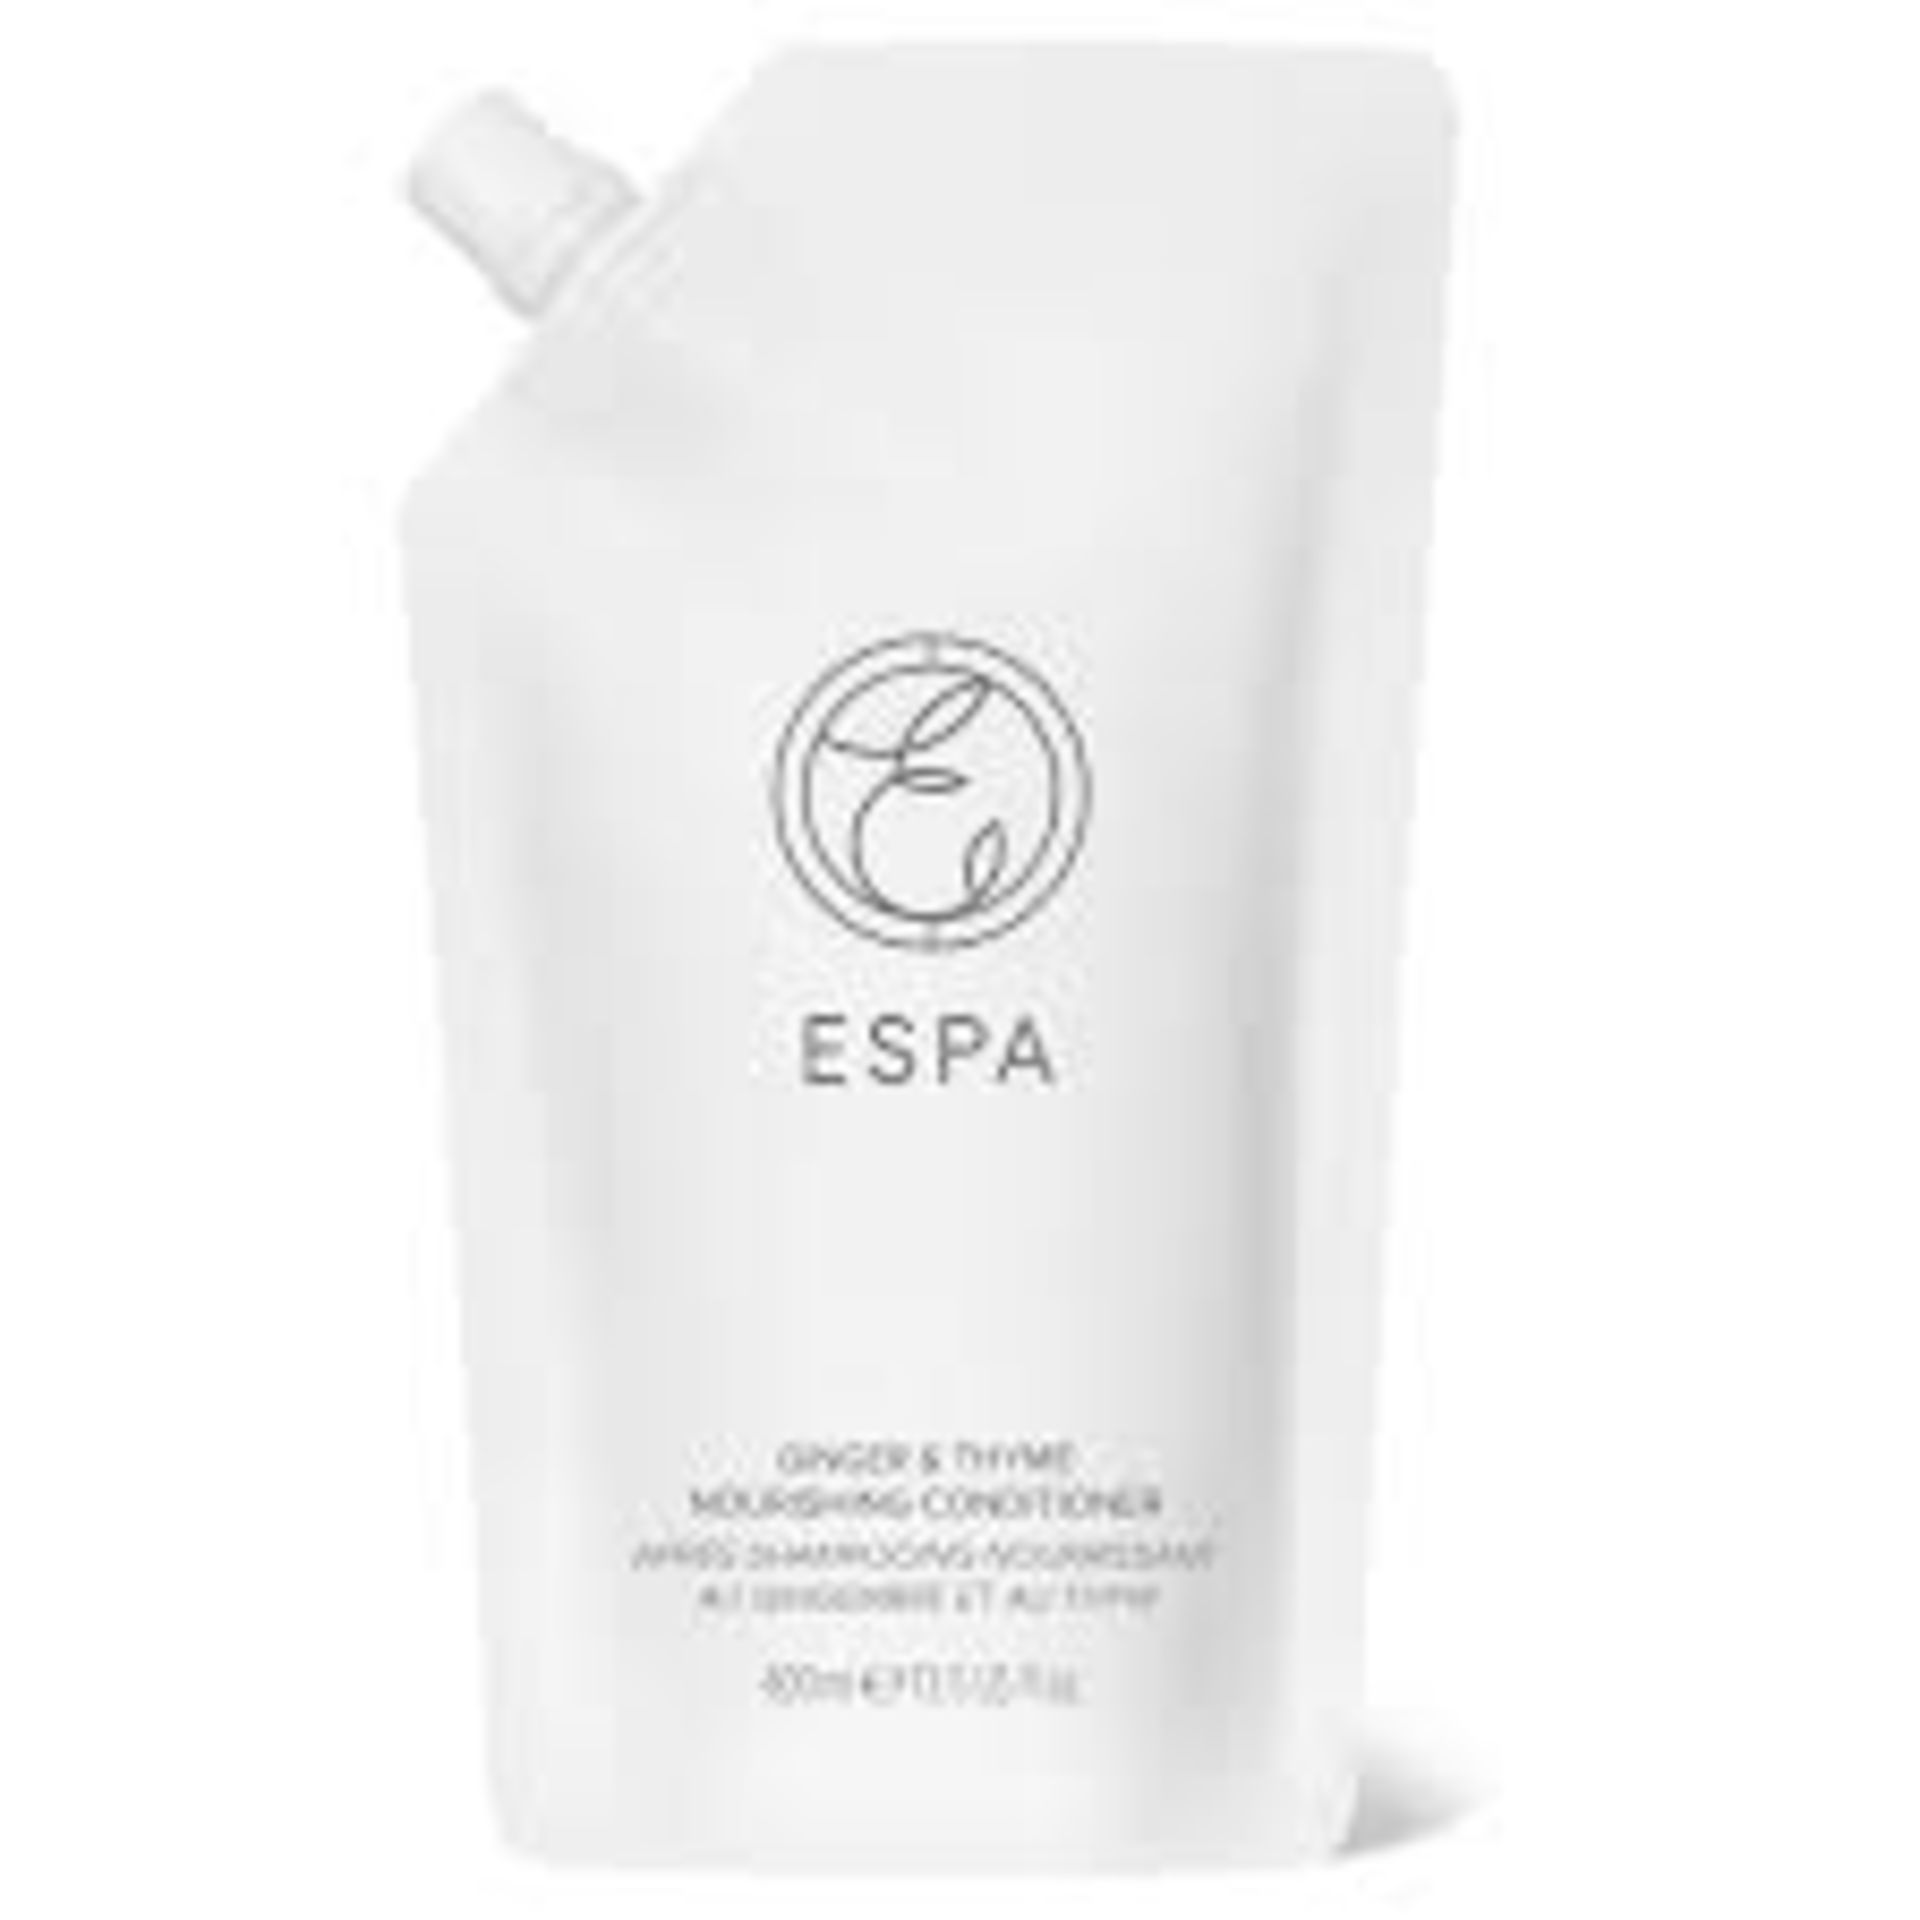 6 X BRAND NEW ESPA 400ML GINGER AND THYME NOURISHING CONDITIONER RRP £25 EACH EBR